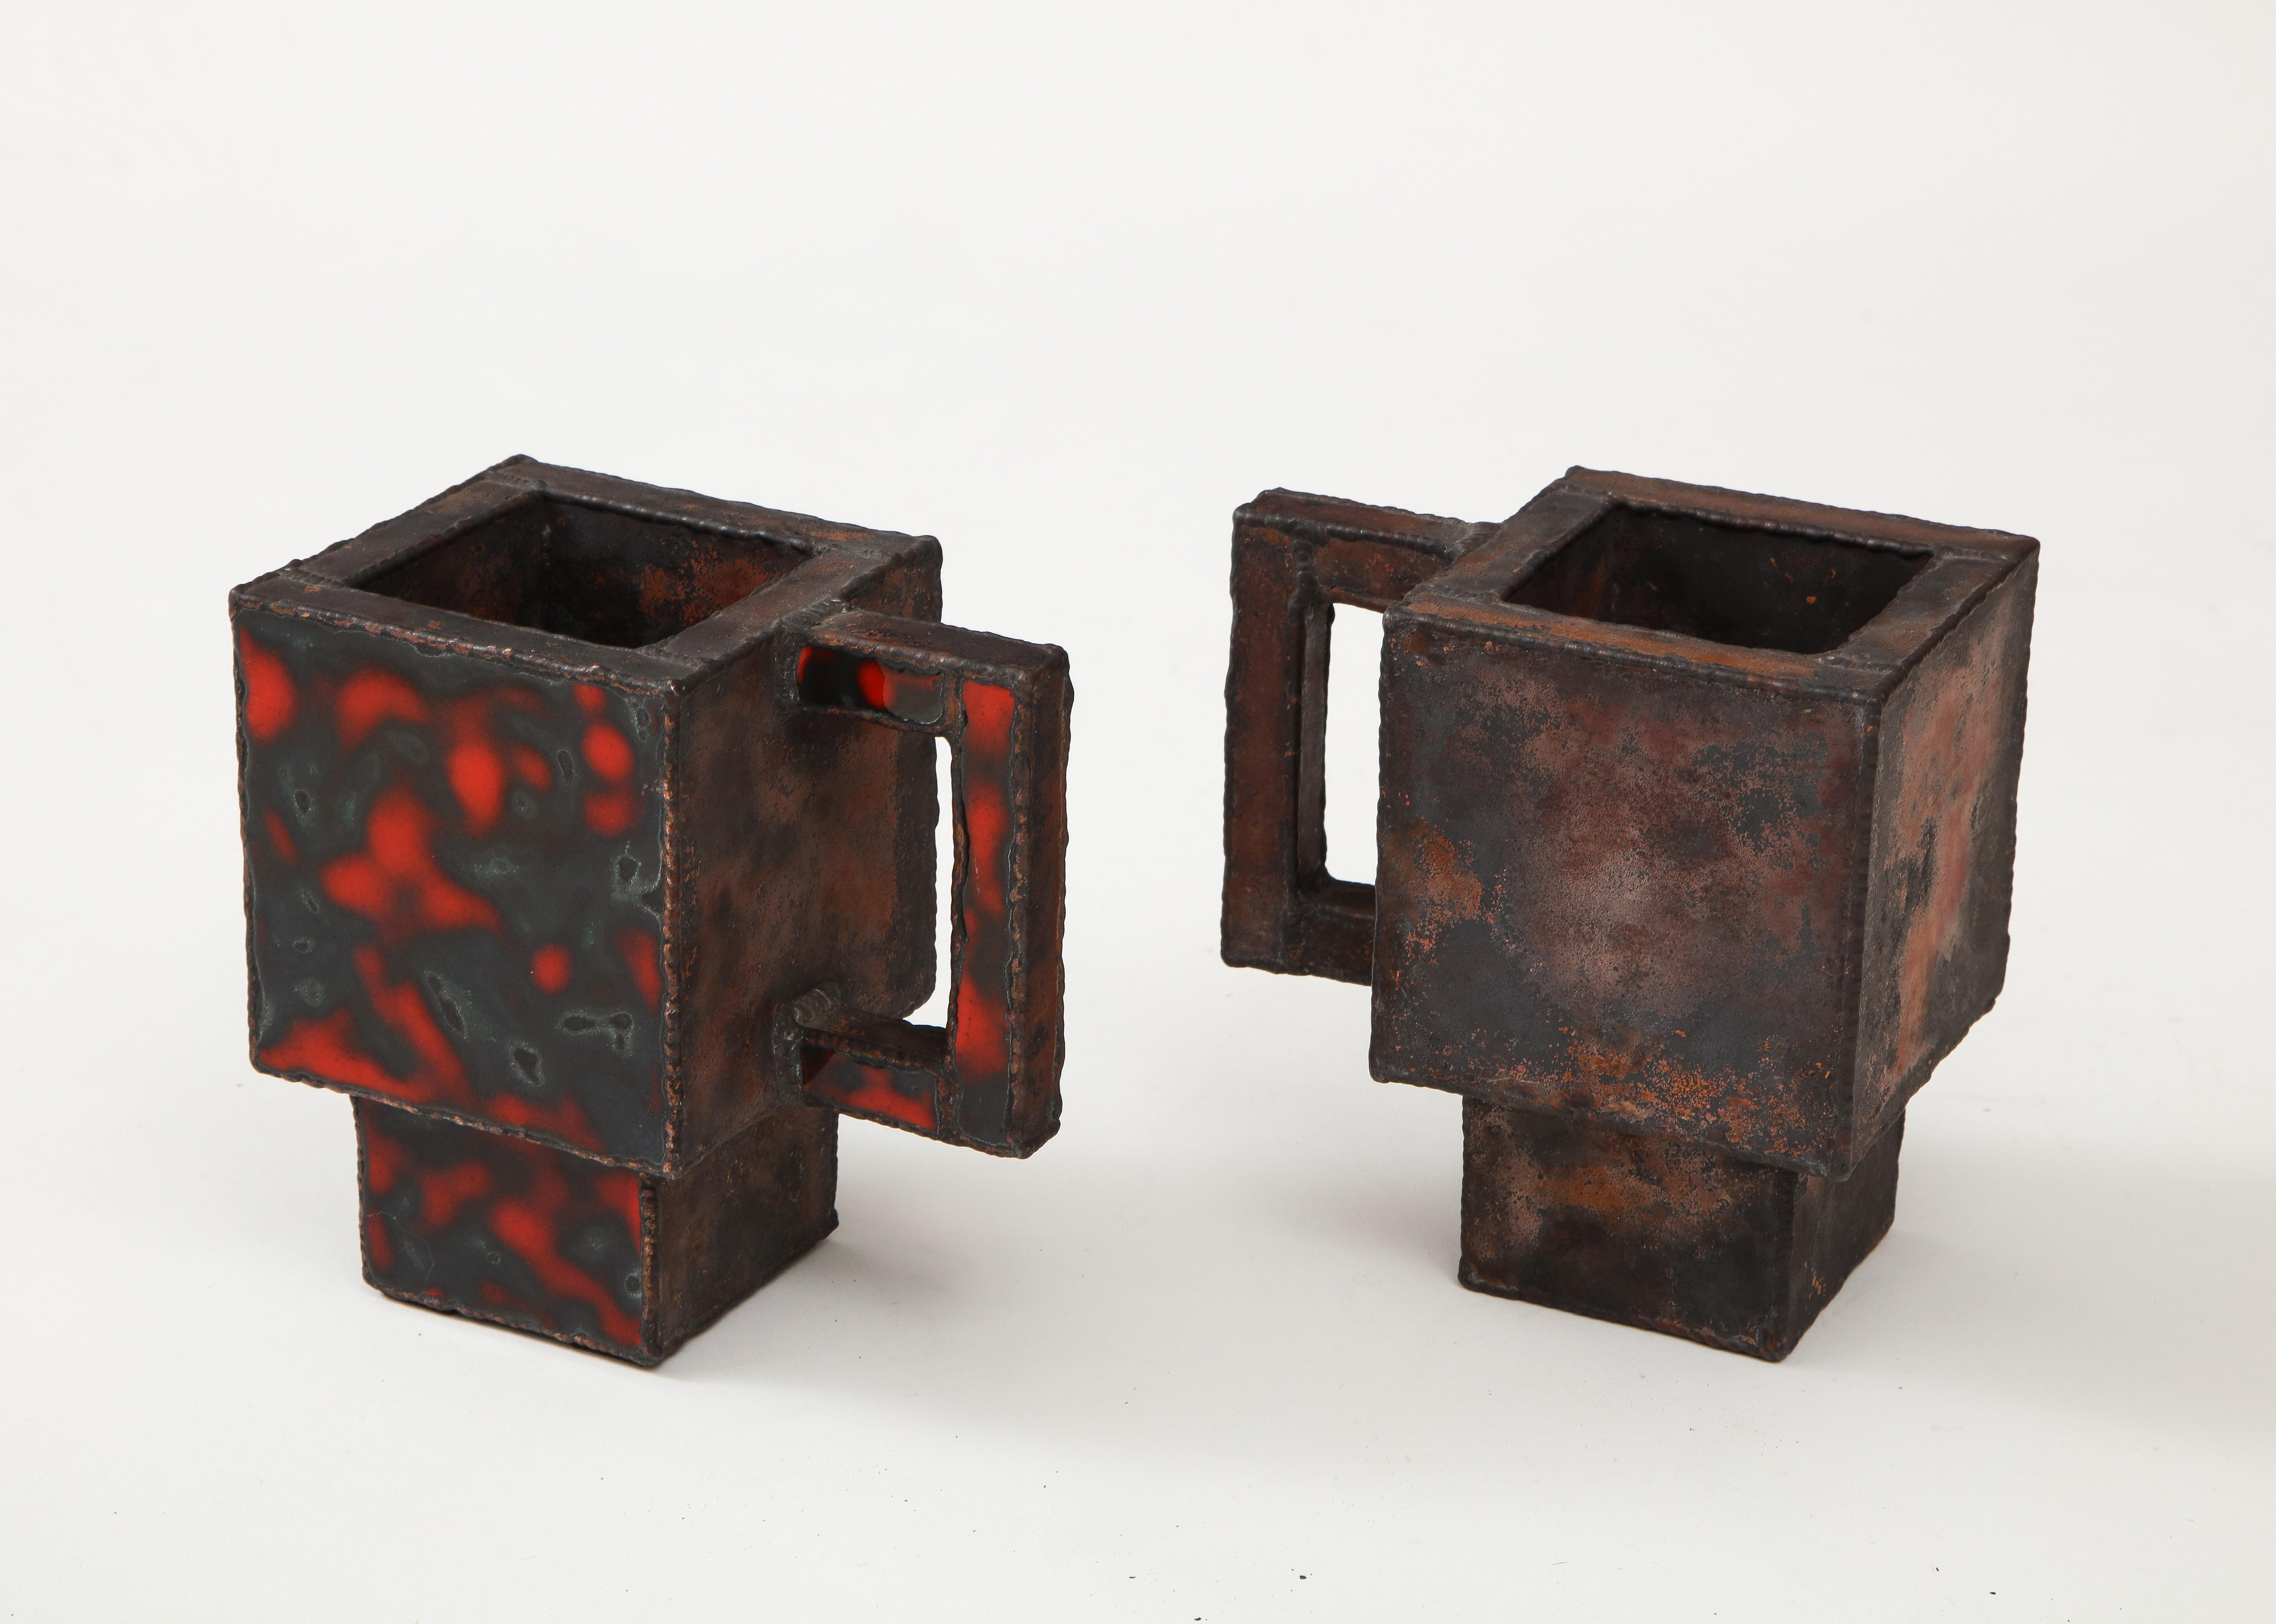 South Korean Pair of Red & Green Enameled Copper Mugs by Kwangho Lee, c. 2012 For Sale